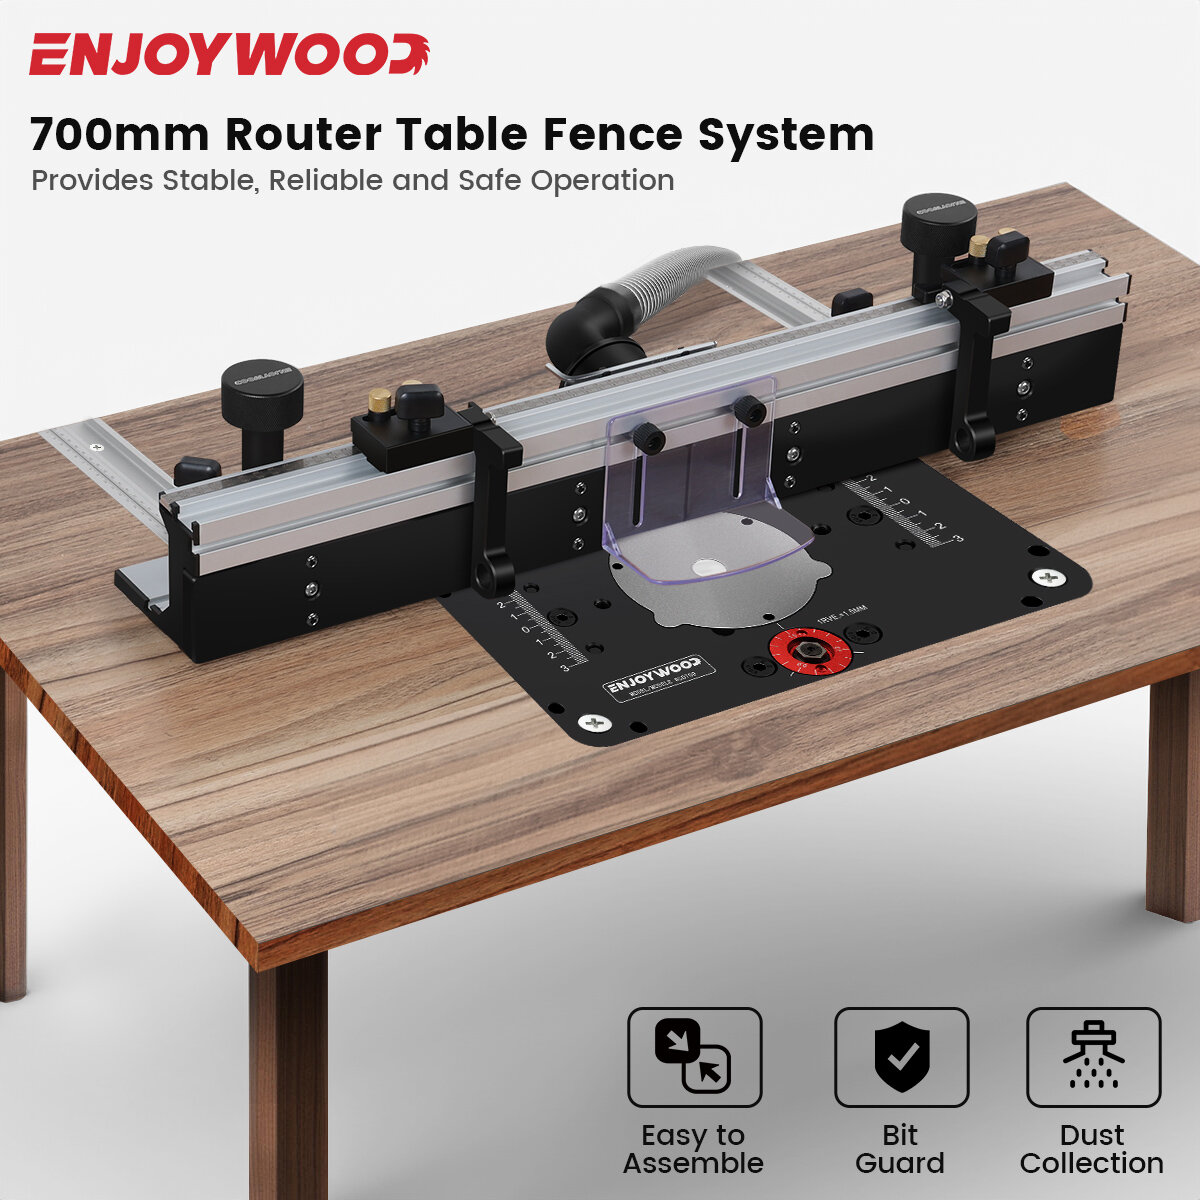 ENJOYWOOD Wnew Woodworking Router Table Fence Aluminium Profile Fence System 700mm with Sliding Brackets Bit Guard